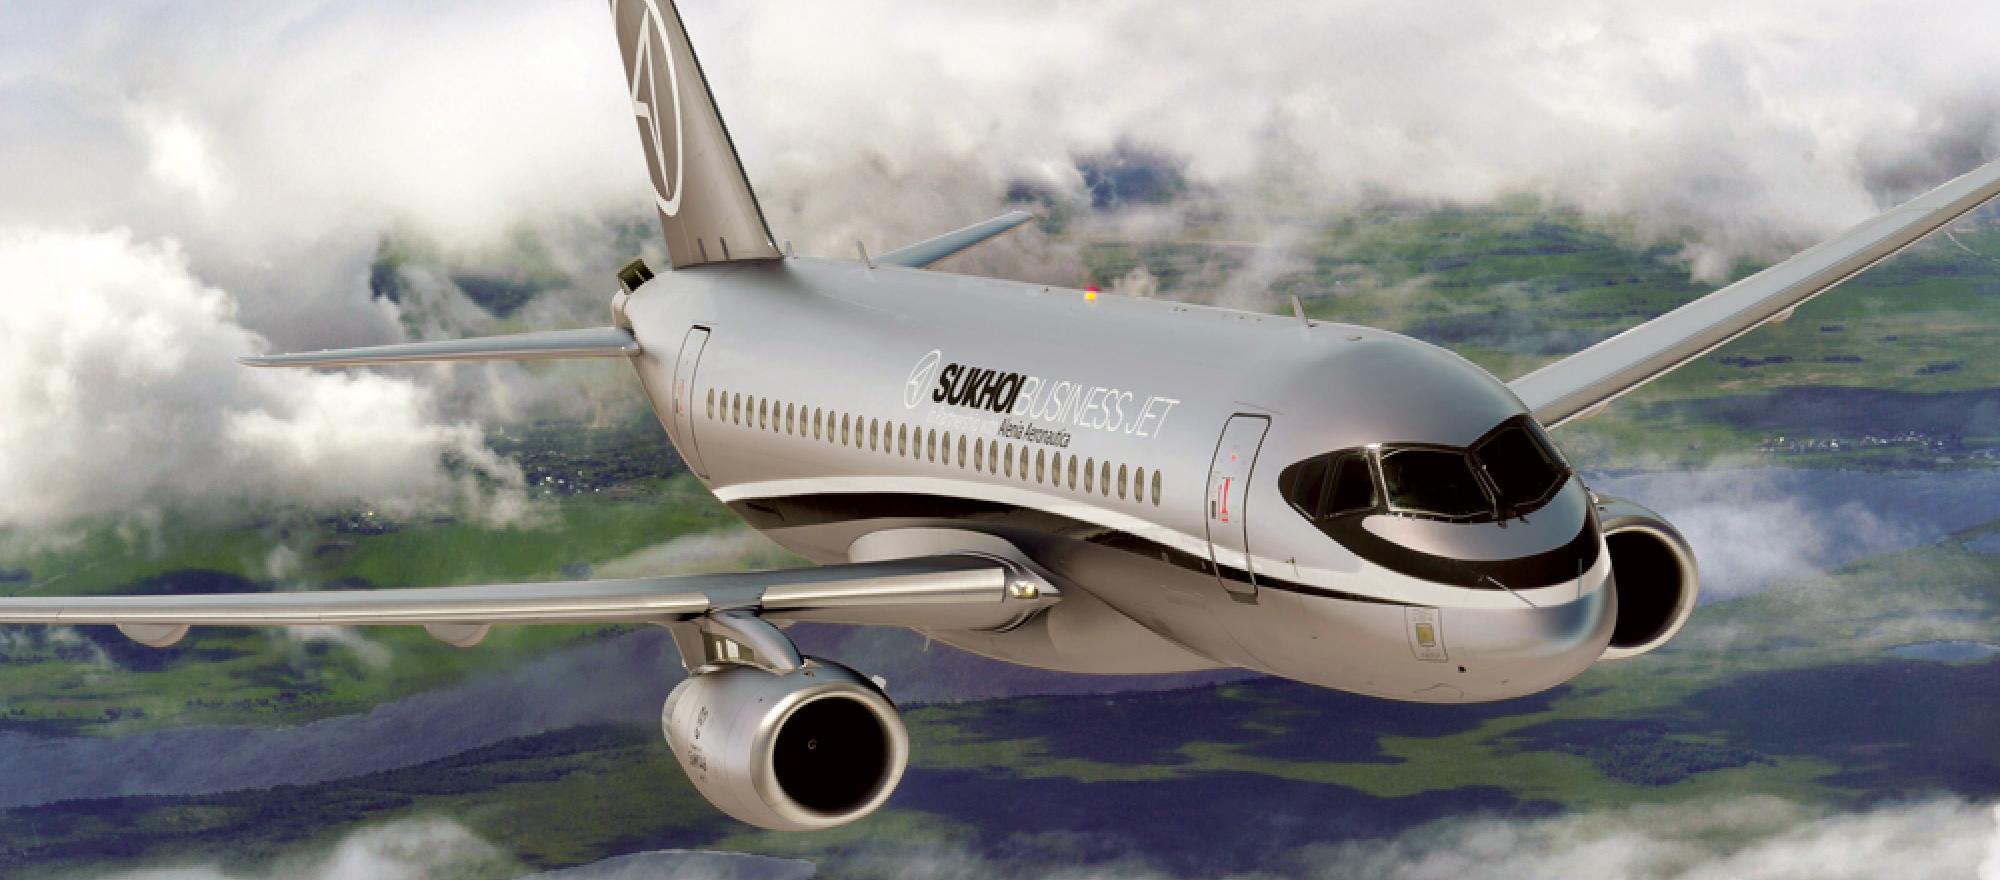 Executive aircraft like the SBJ are positioned between larger models from Boeing and Airbus and smaller, faster ones from Gulfstream and Bombardier.